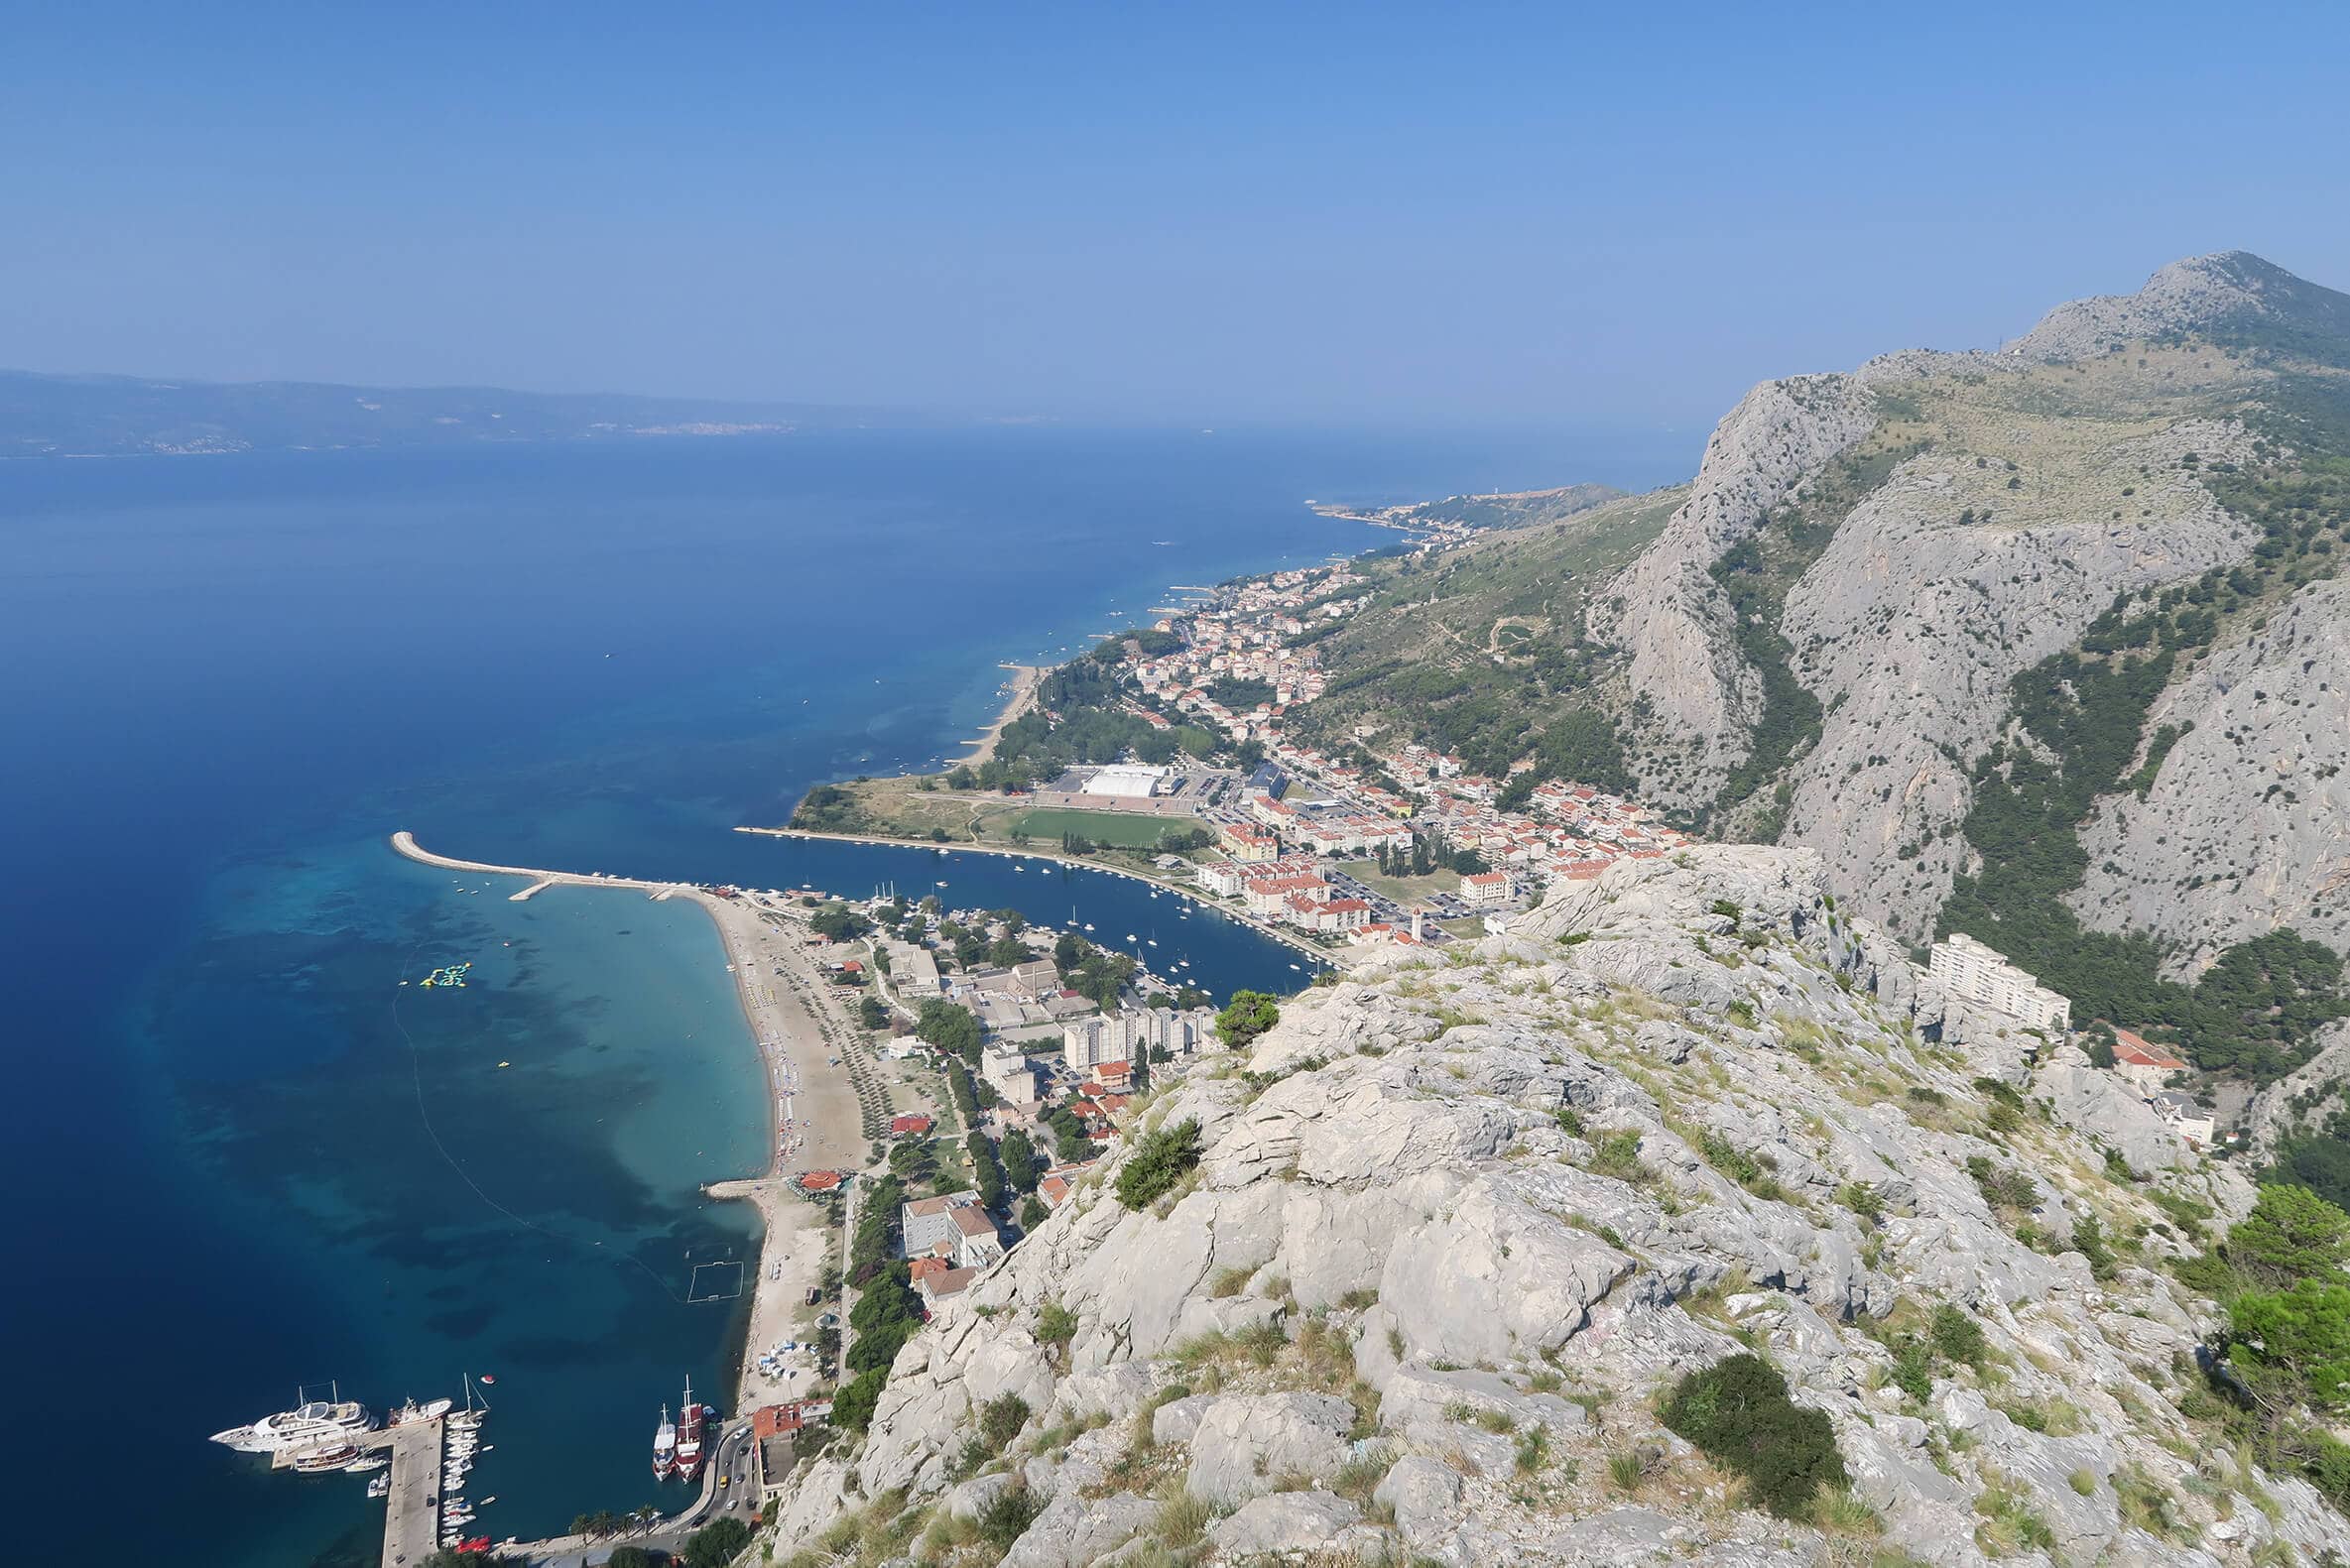 Omis, Croatia - One of the most underrated cities in the world + why you should add it to your bucket list low!